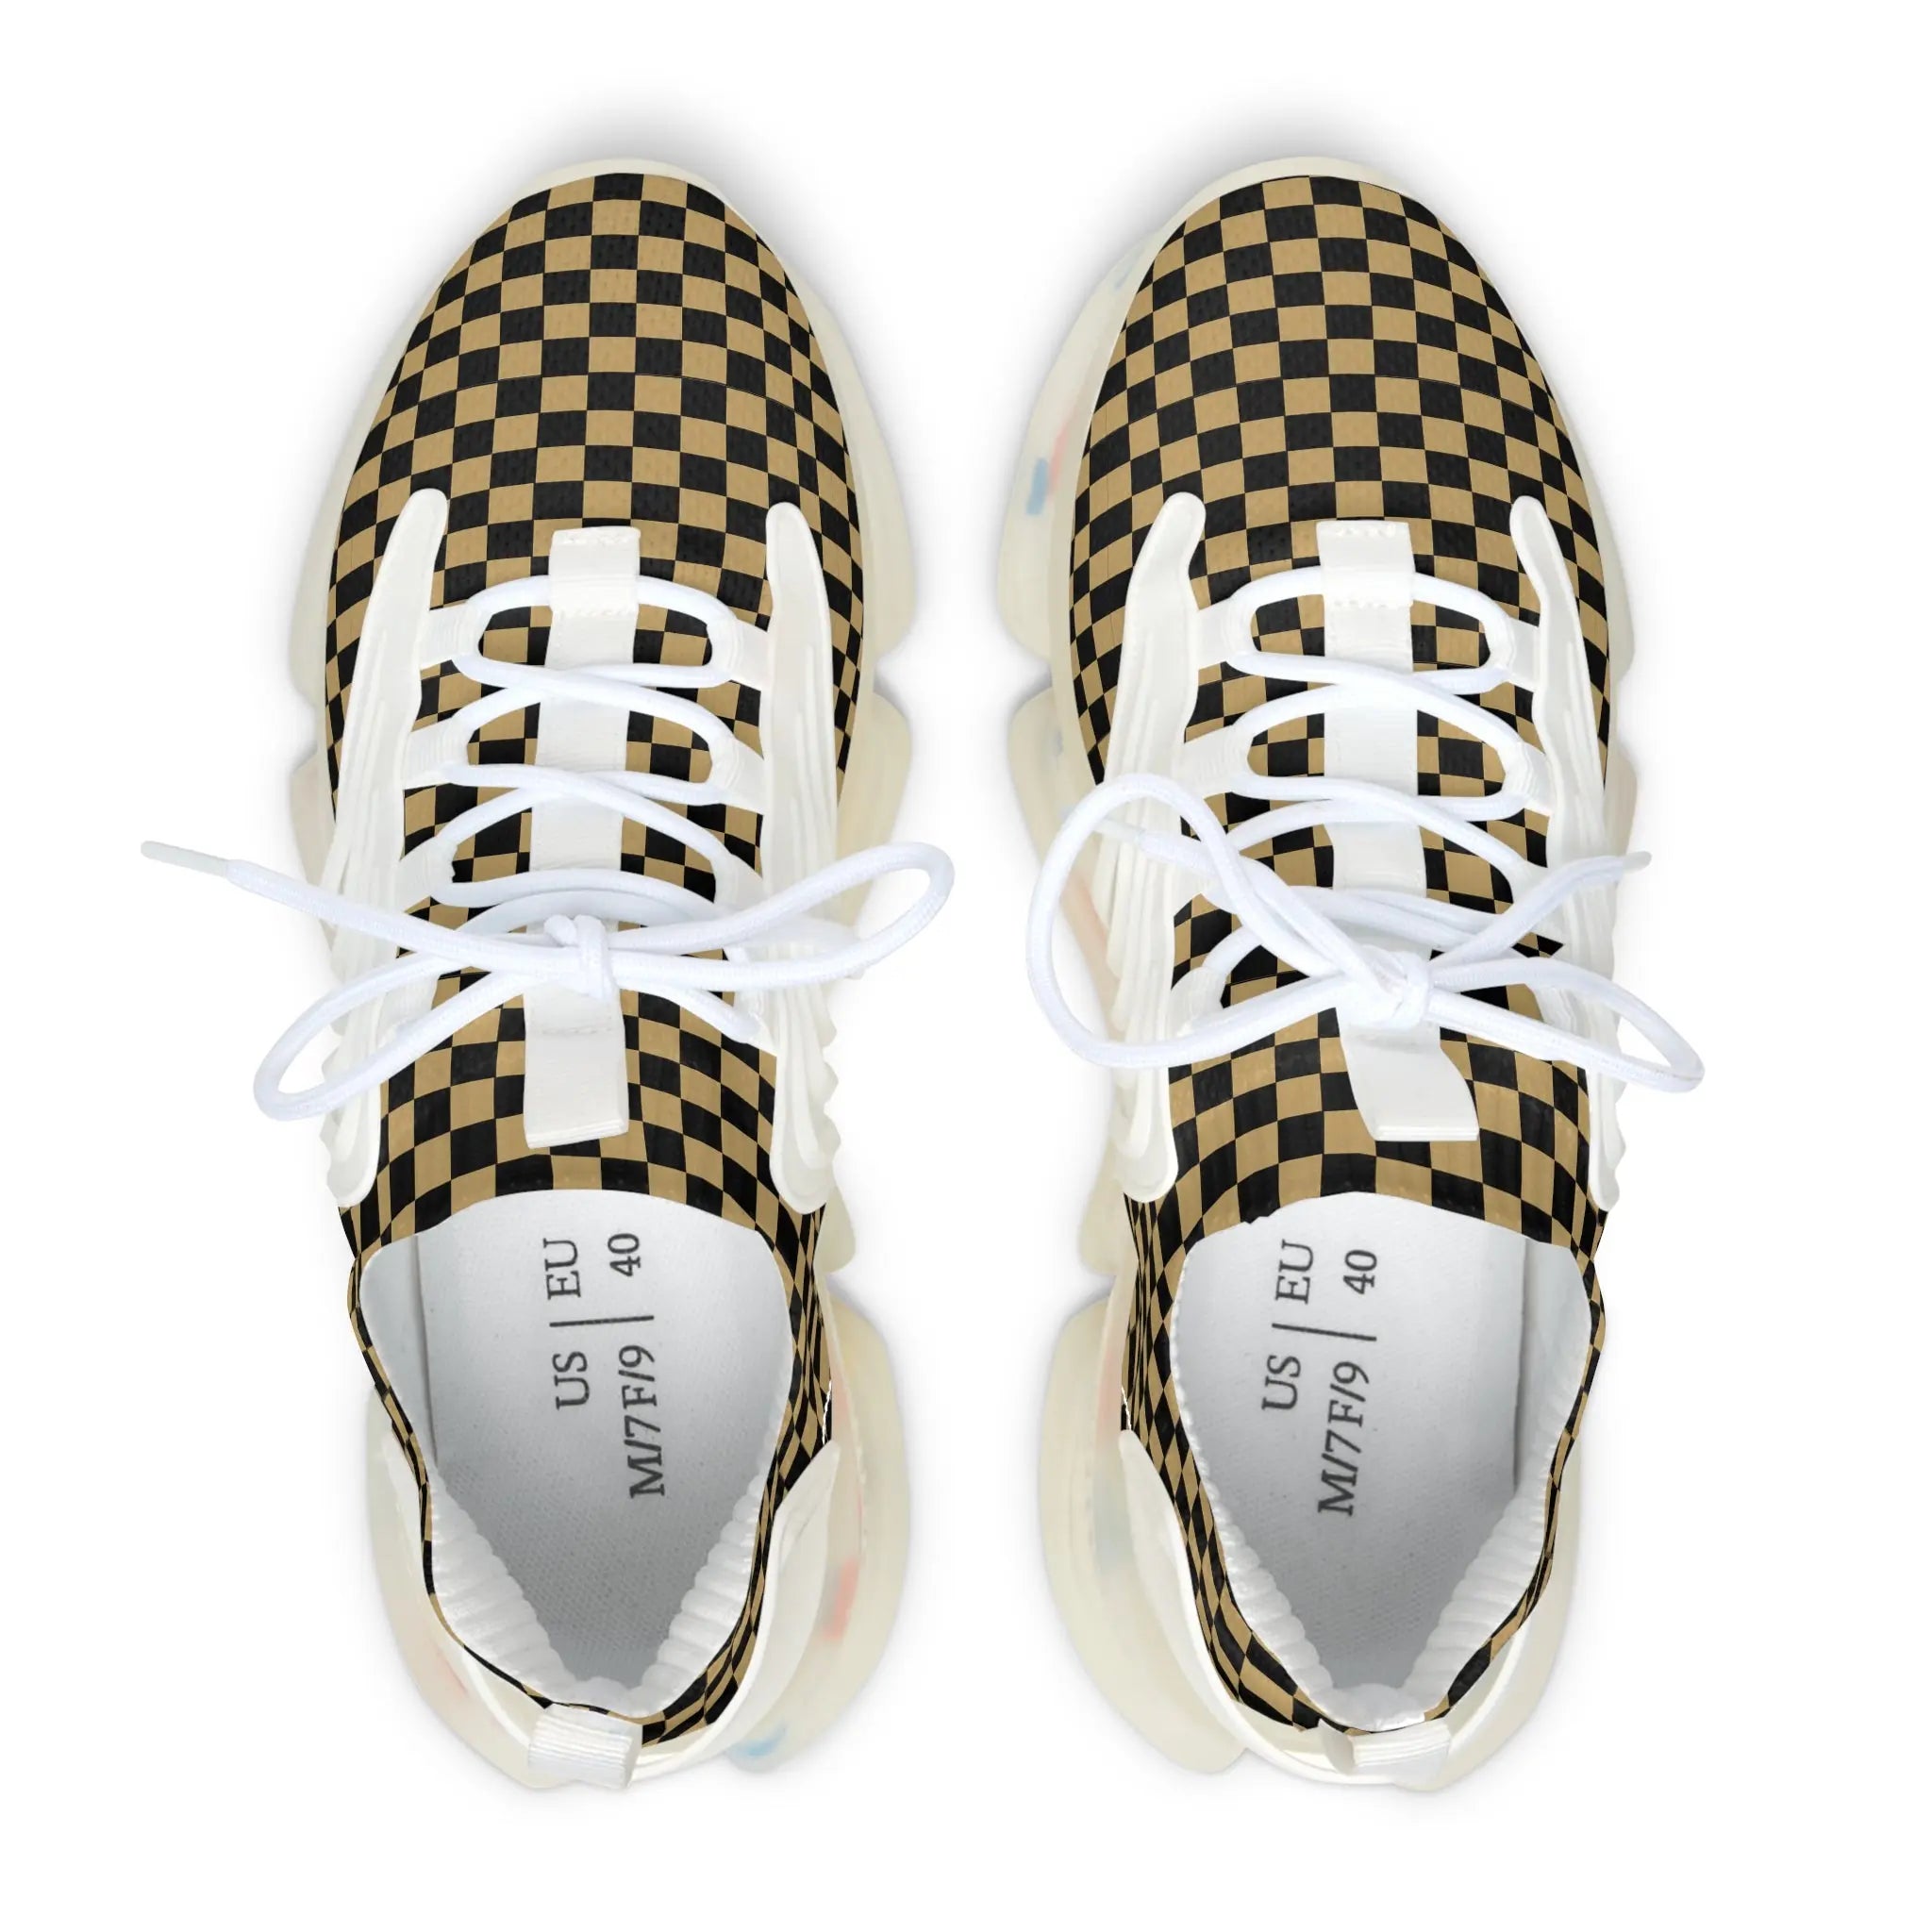 Women's Black and Gold Check Mate Mesh Sneakers, Women's Athletic Shoes, Casual Sneakers Shoes  The Middle Aged Groove